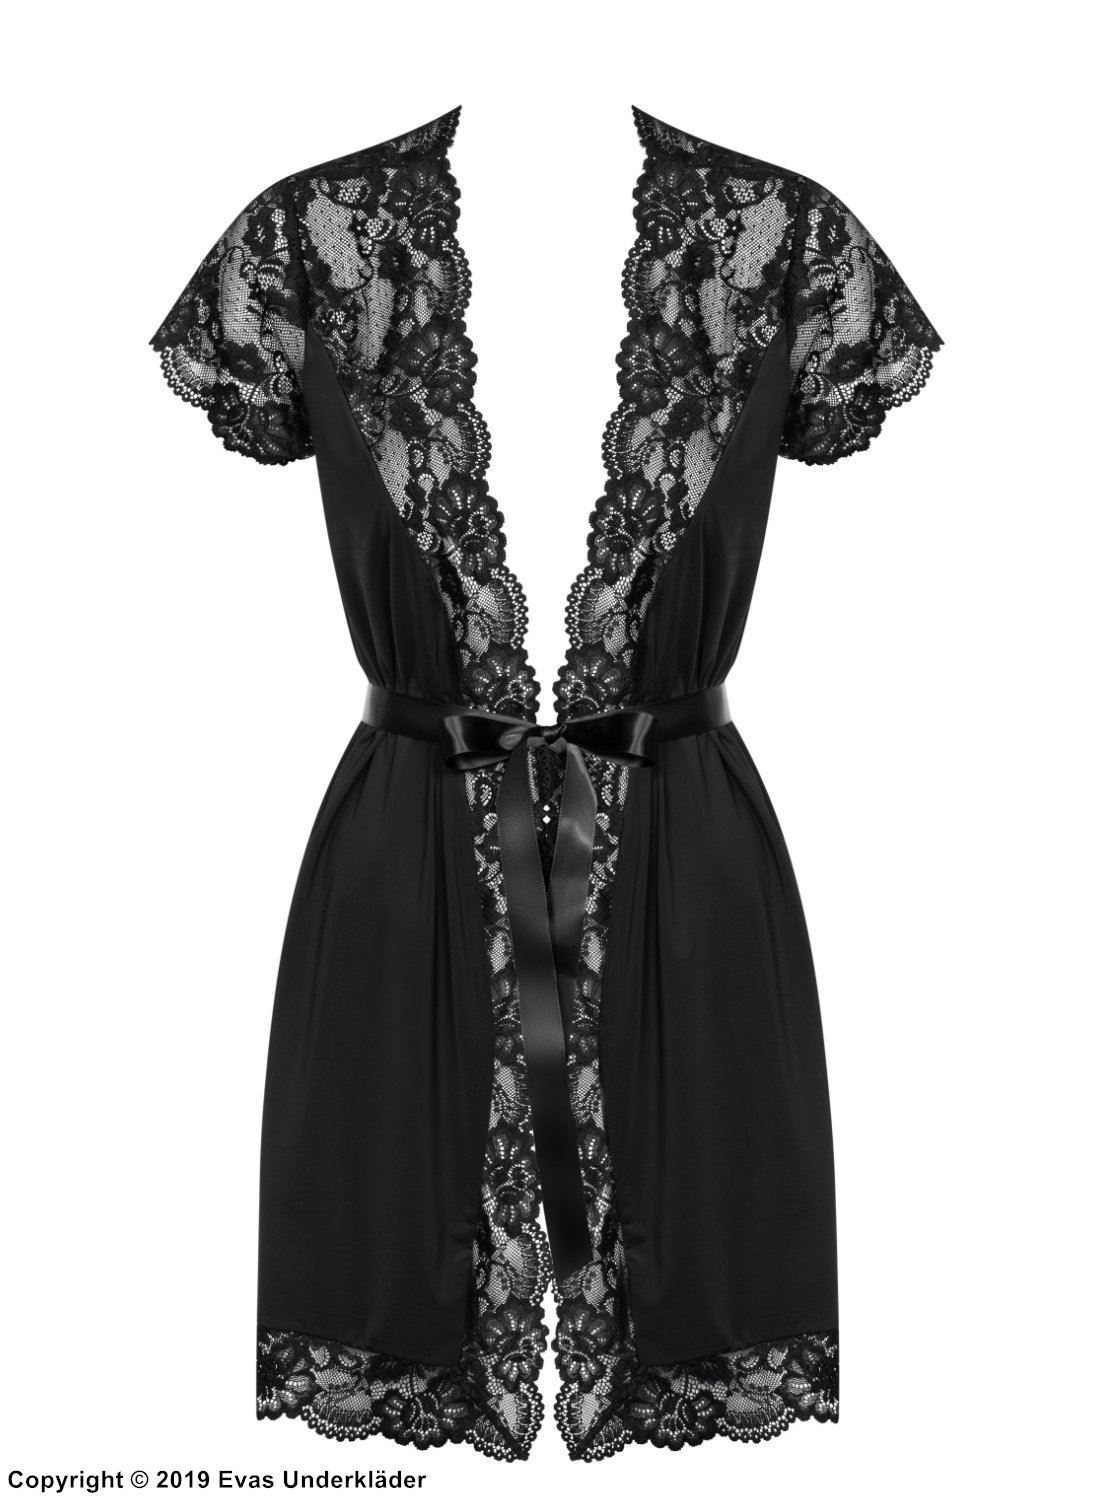 Lounge robe, lace trim, short sleeves, flowers